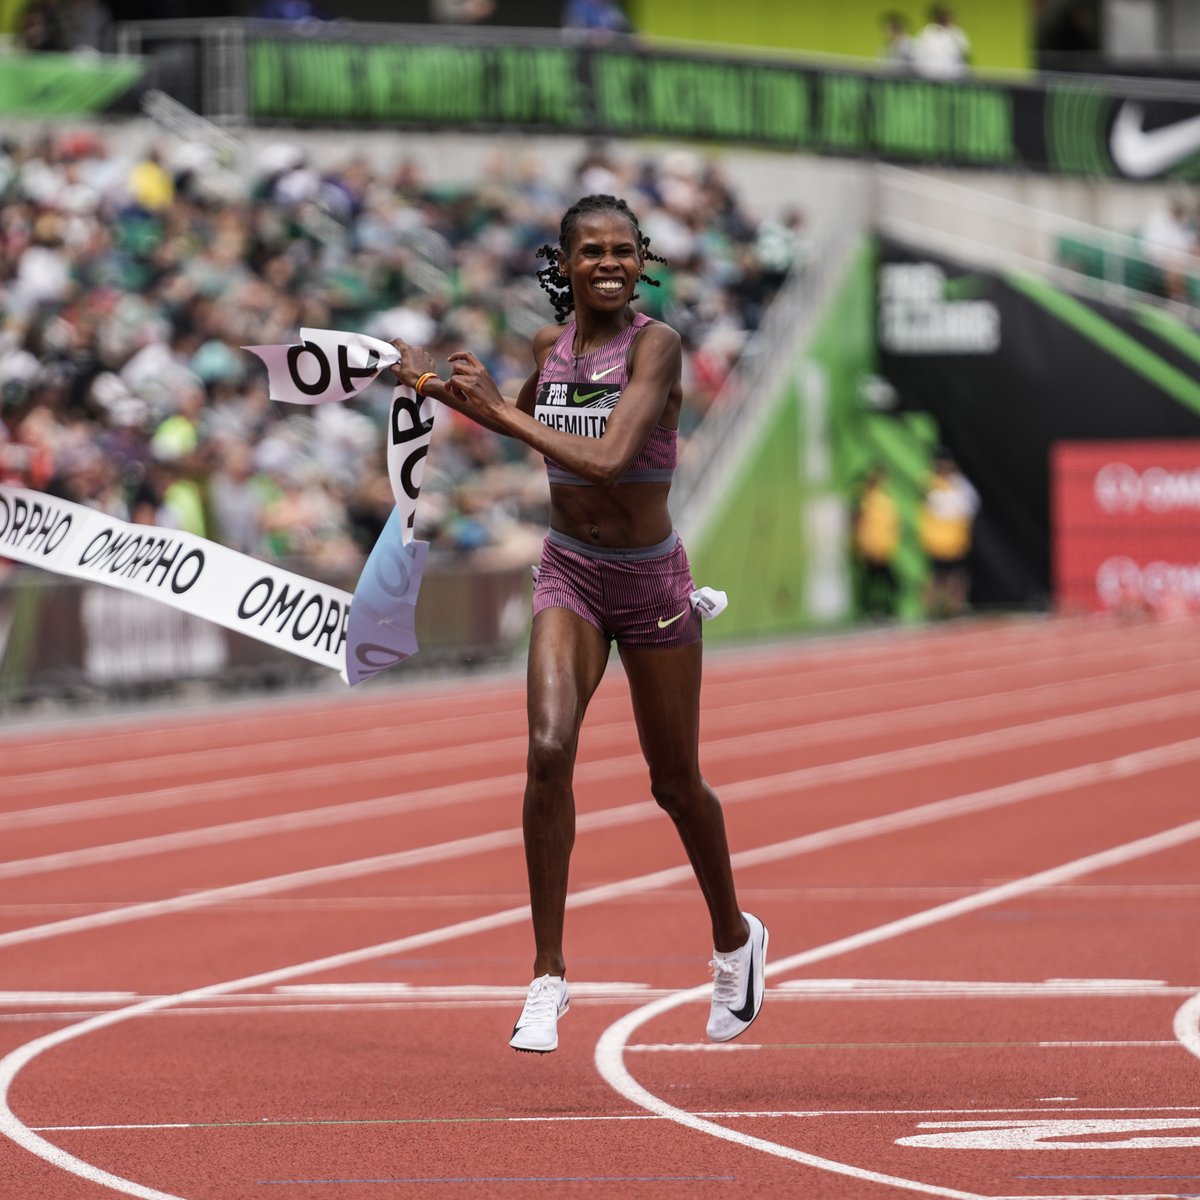 National record ✅ World lead ✅ 🇺🇬's Olympic champ Peruth Chemutai looks ready to defend her title in @Paris2024 as she claims the 3000m steeplechase at the @nikepreclassic with 8:55.09. That's the first sub 9-clocking of her career 👀 📸 @matthewquine #DiamondLeague